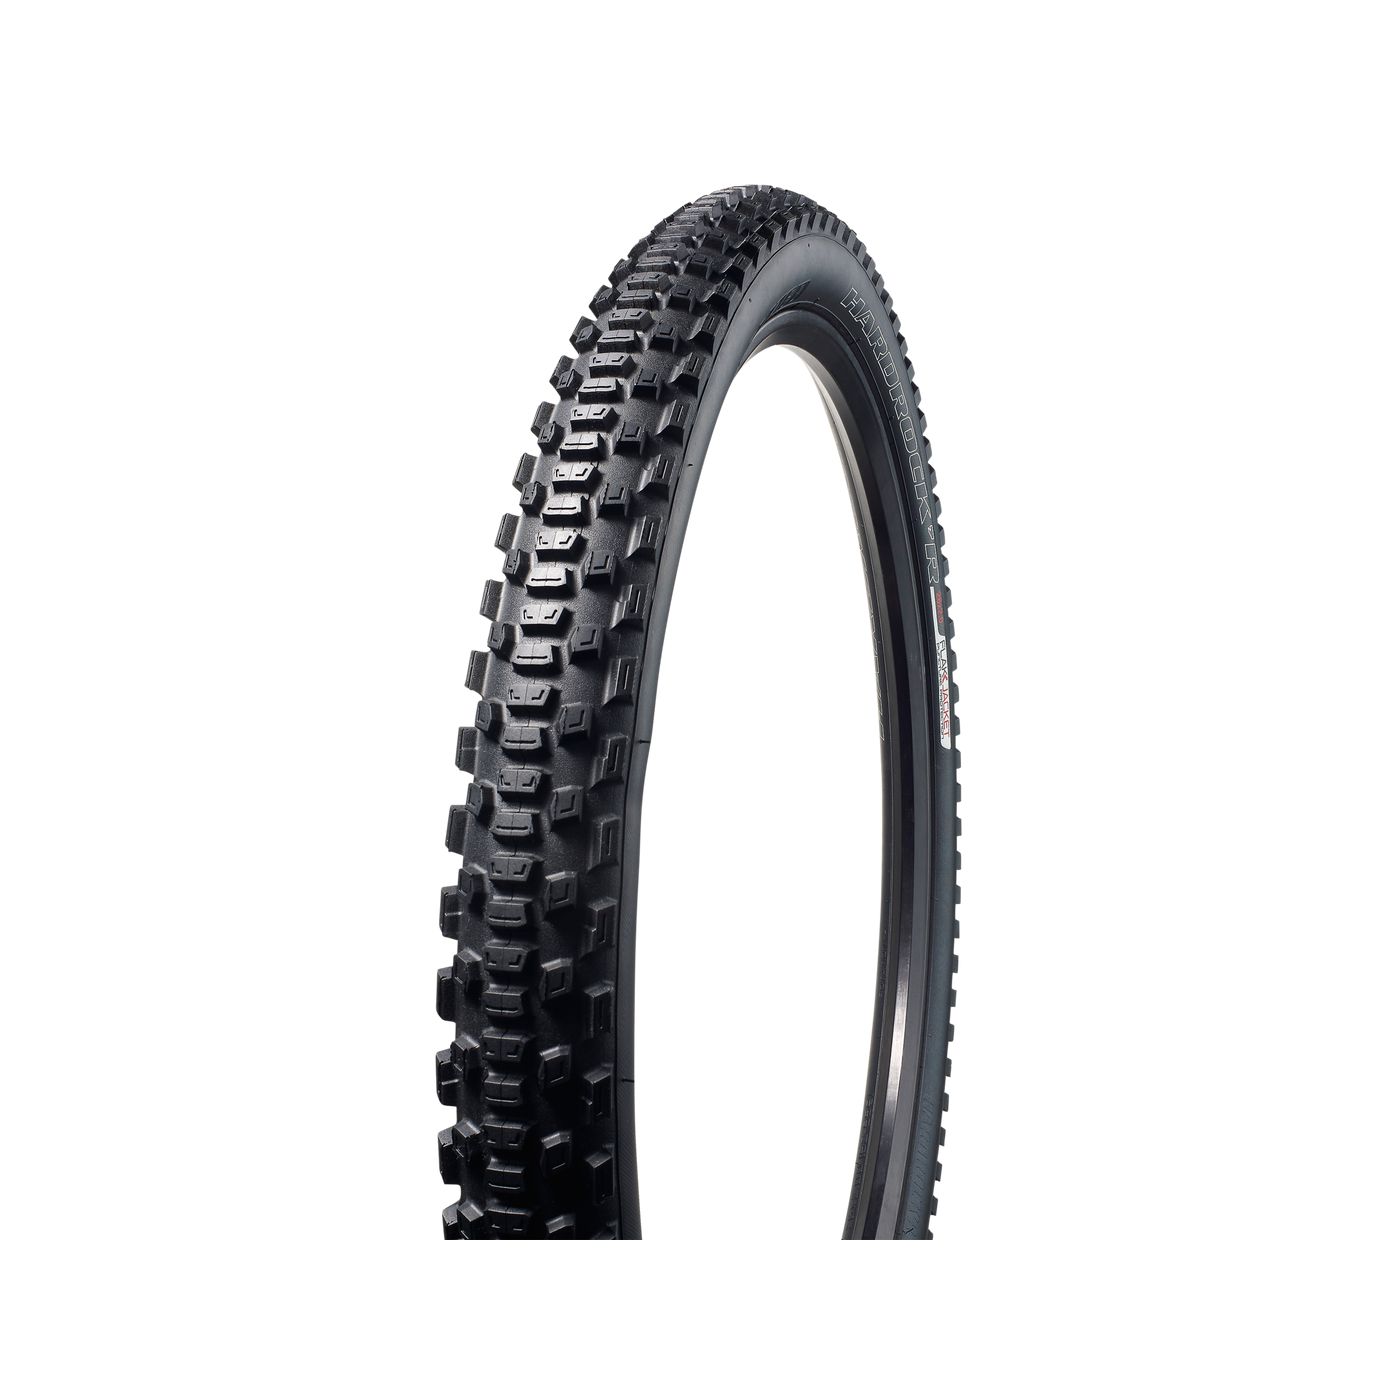 Specialized Hardrock'R 27.5" Bike Tire - Tires - Bicycle Warehouse